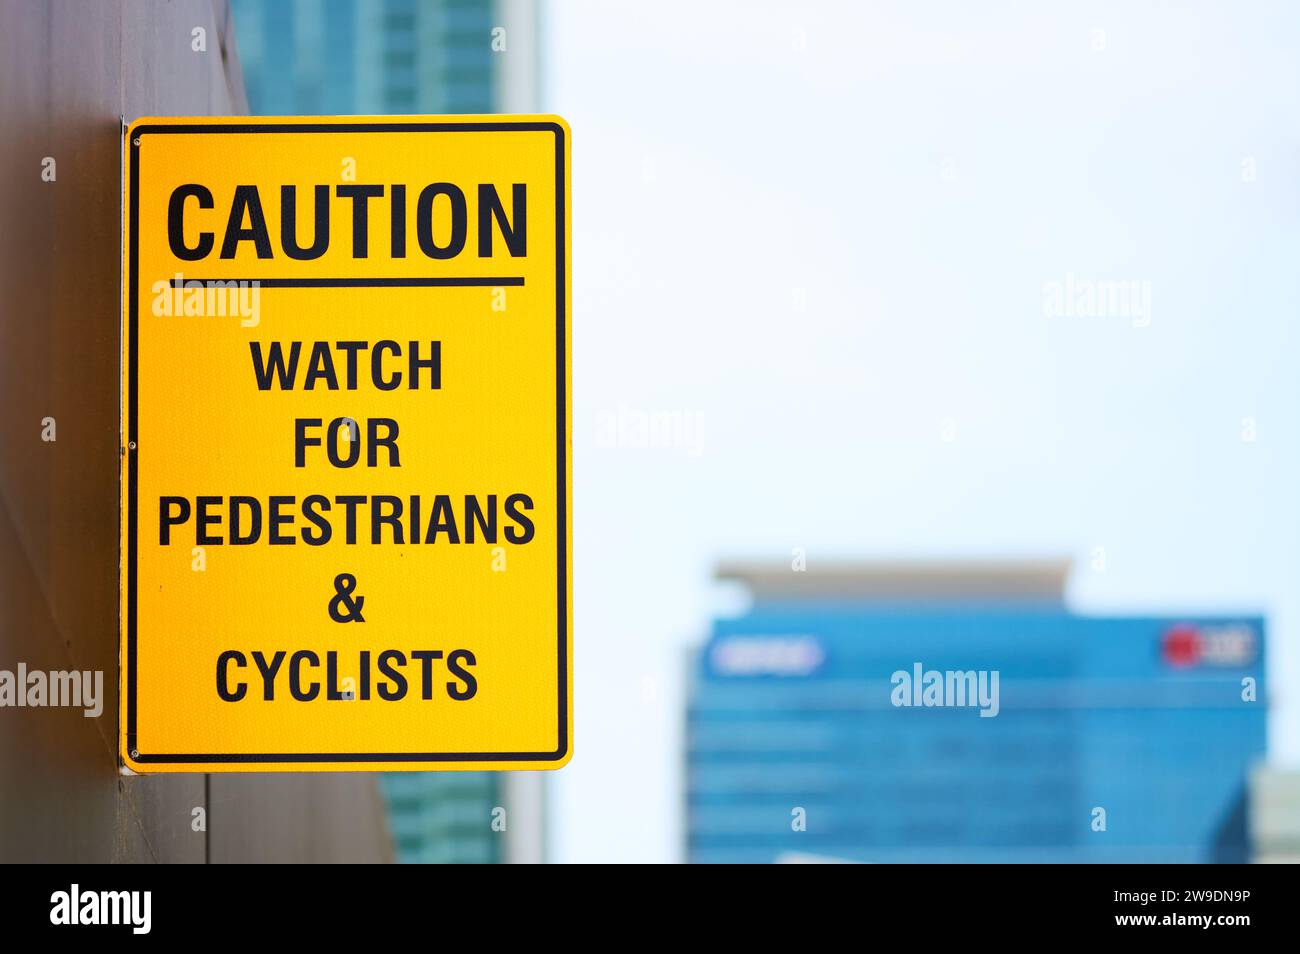 A yellow sign warning Caution, Watch for Pedestrians and Cyclists, in an urban environment with copy space. Stock Photo